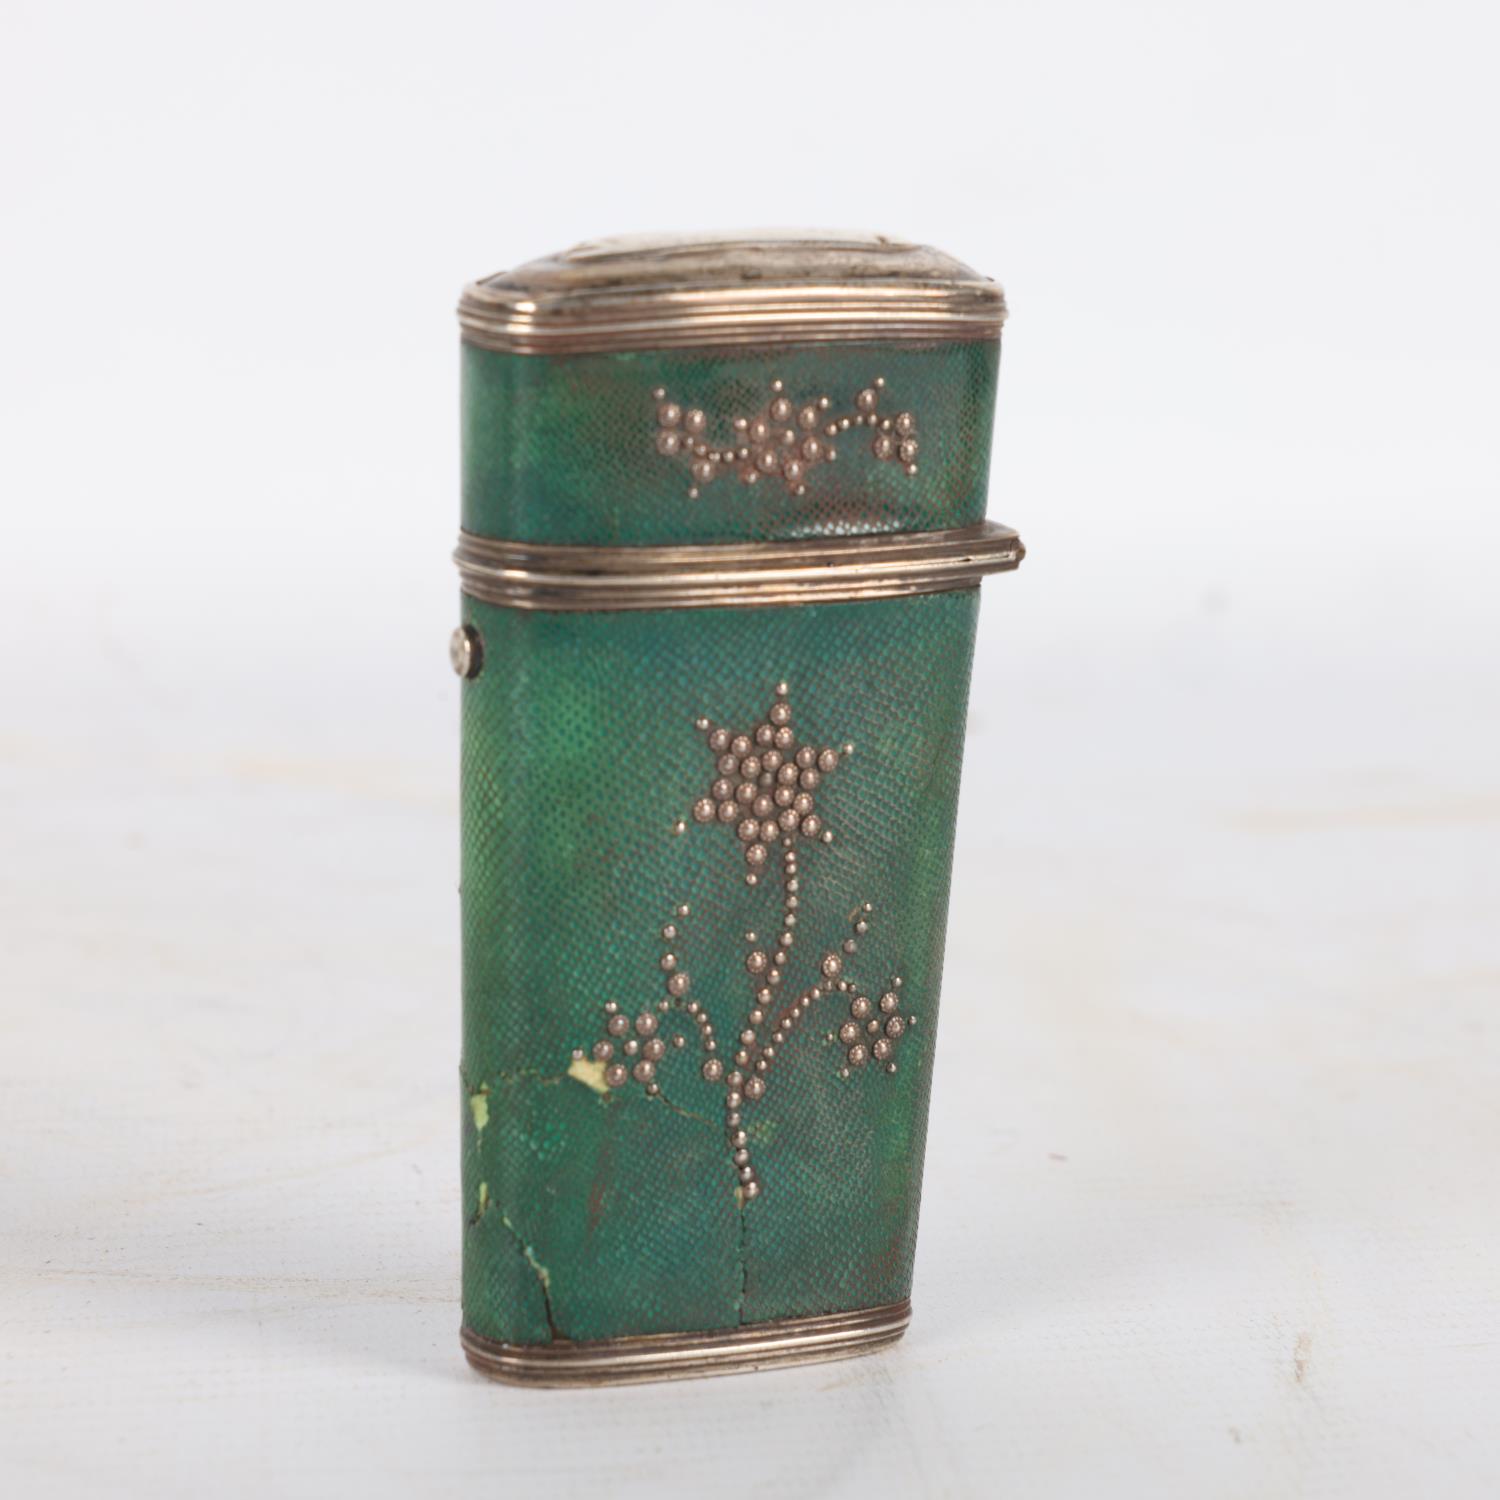 An early 19th century shagreen sewing etui, applied steel pinwork decoration, with unmarked silver - Image 2 of 3